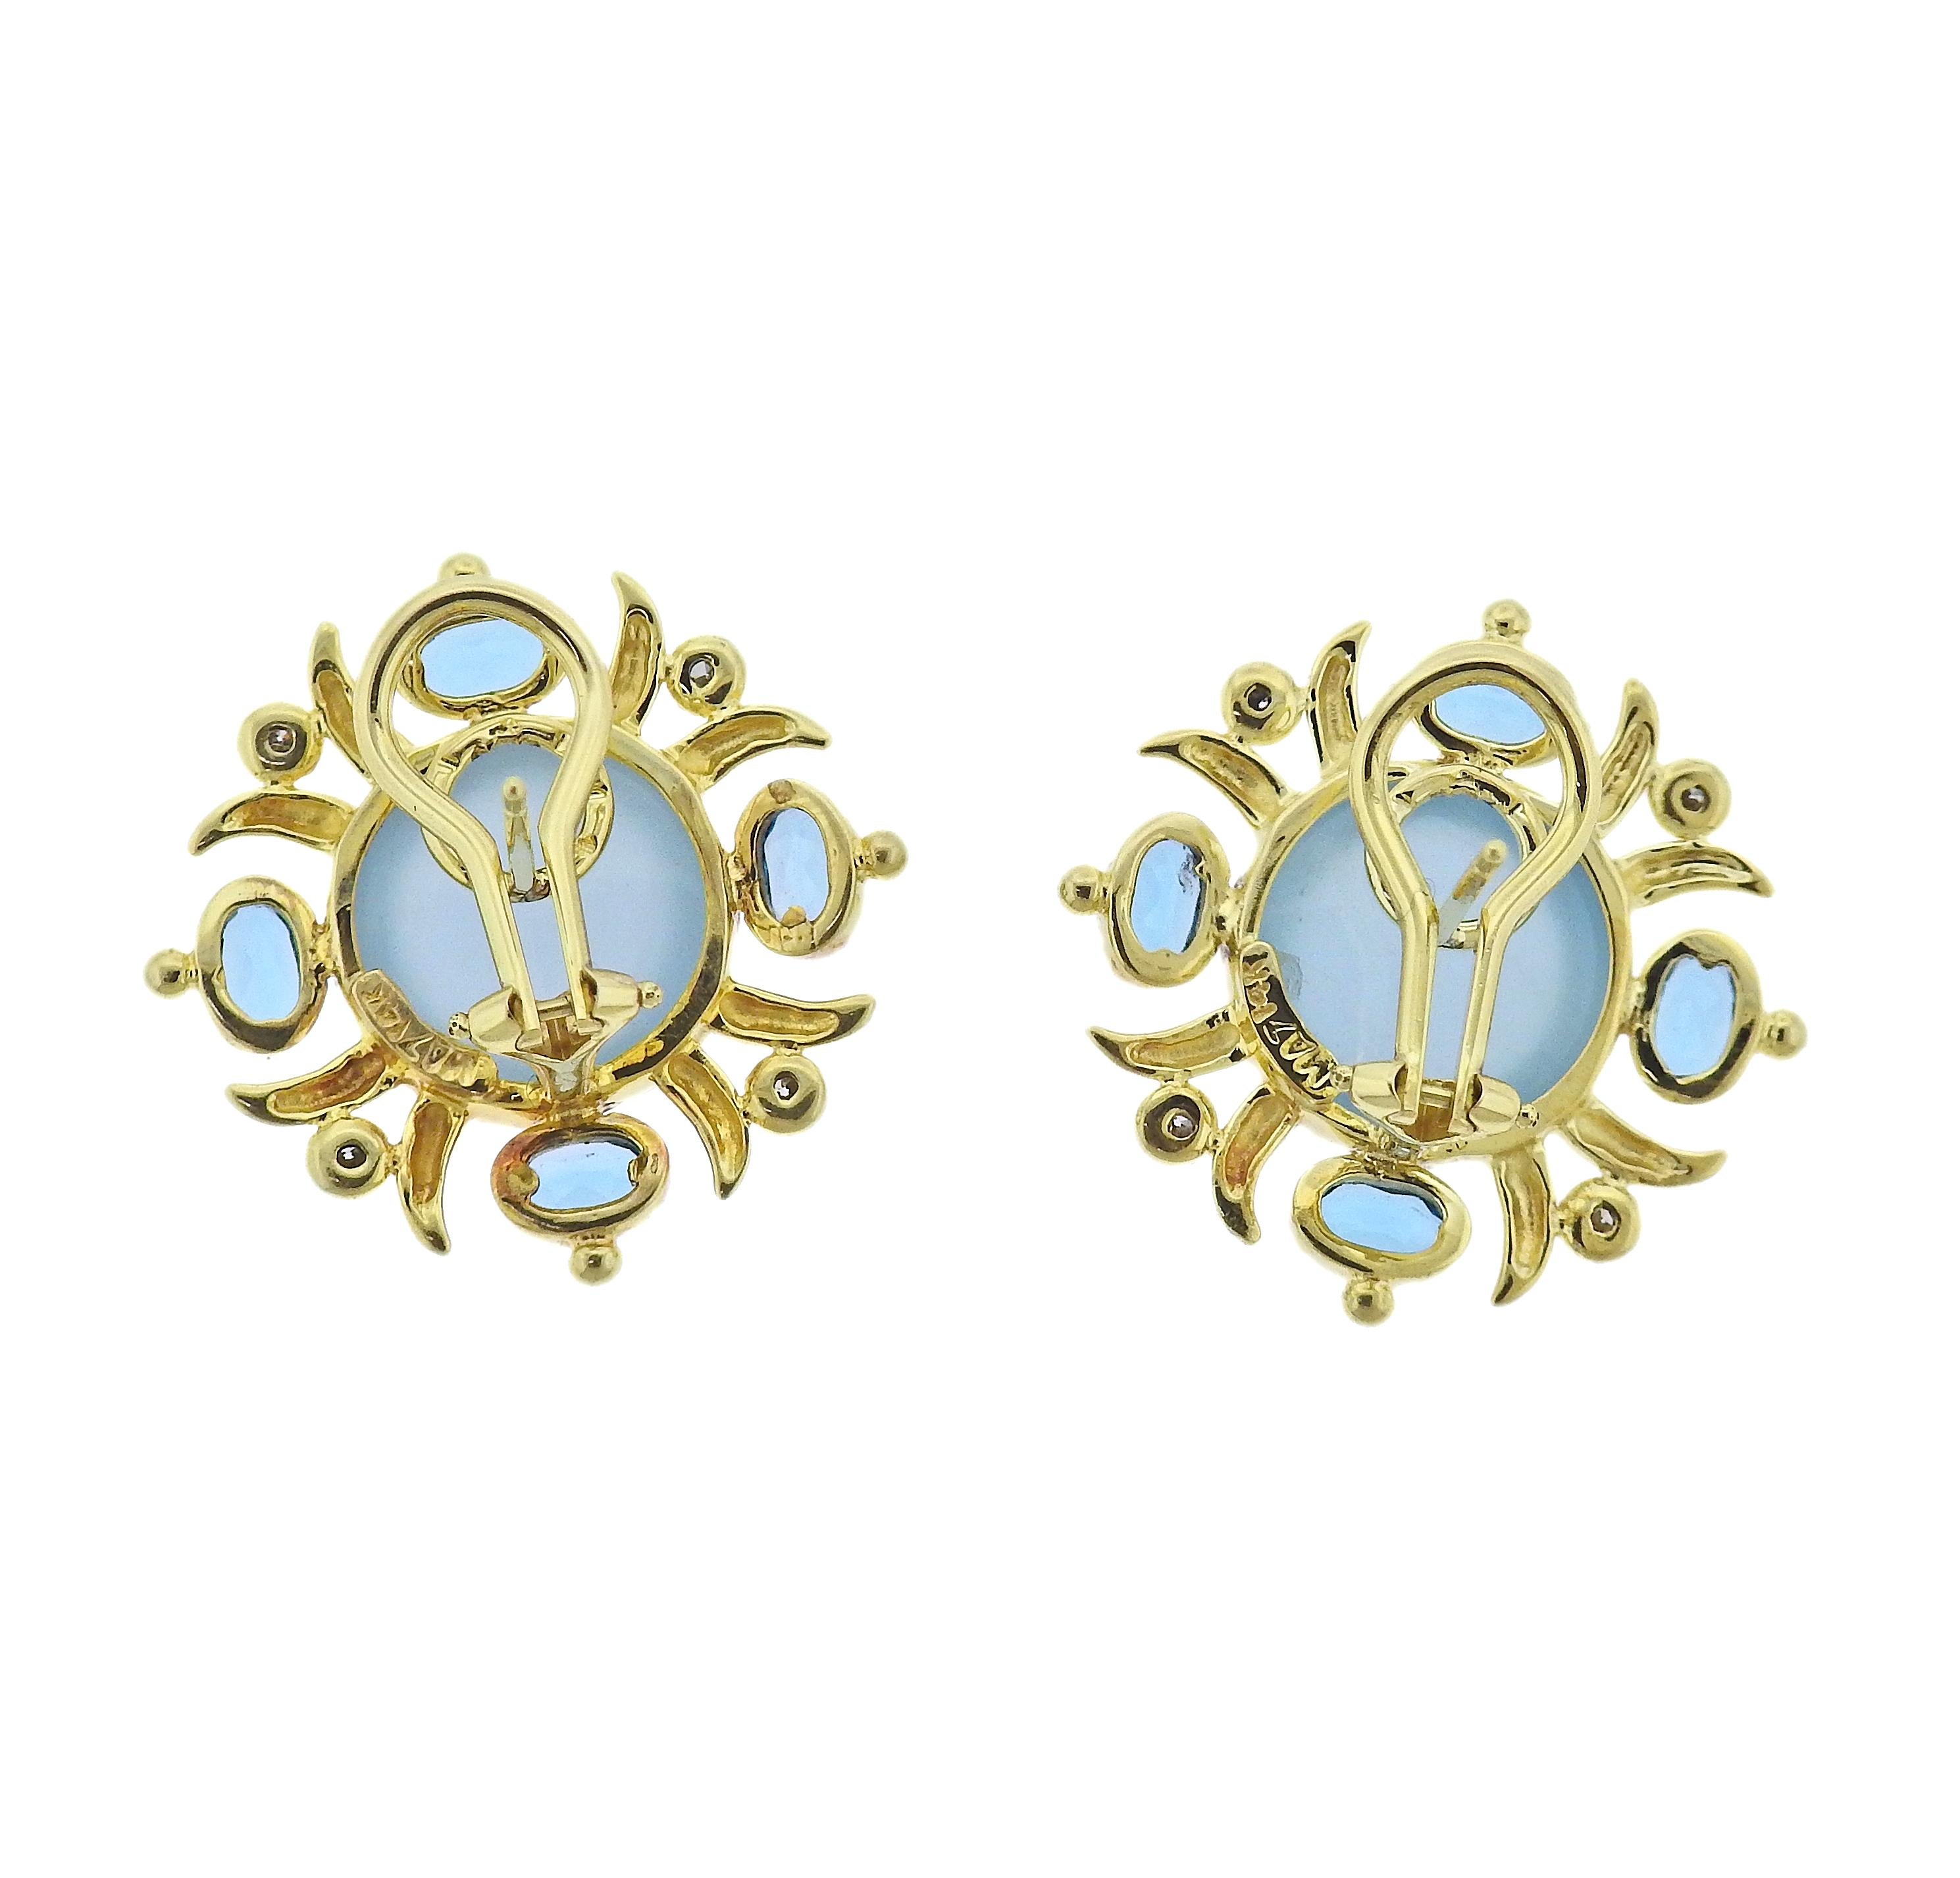 Brand new 14k gold Maz earrings with 0.20ctw H/VS diamonds, moonstones and blue topaz. Earrings are 25mm x 25mm. Weight - 11.2 grams. Marked: MAZ, 14k.